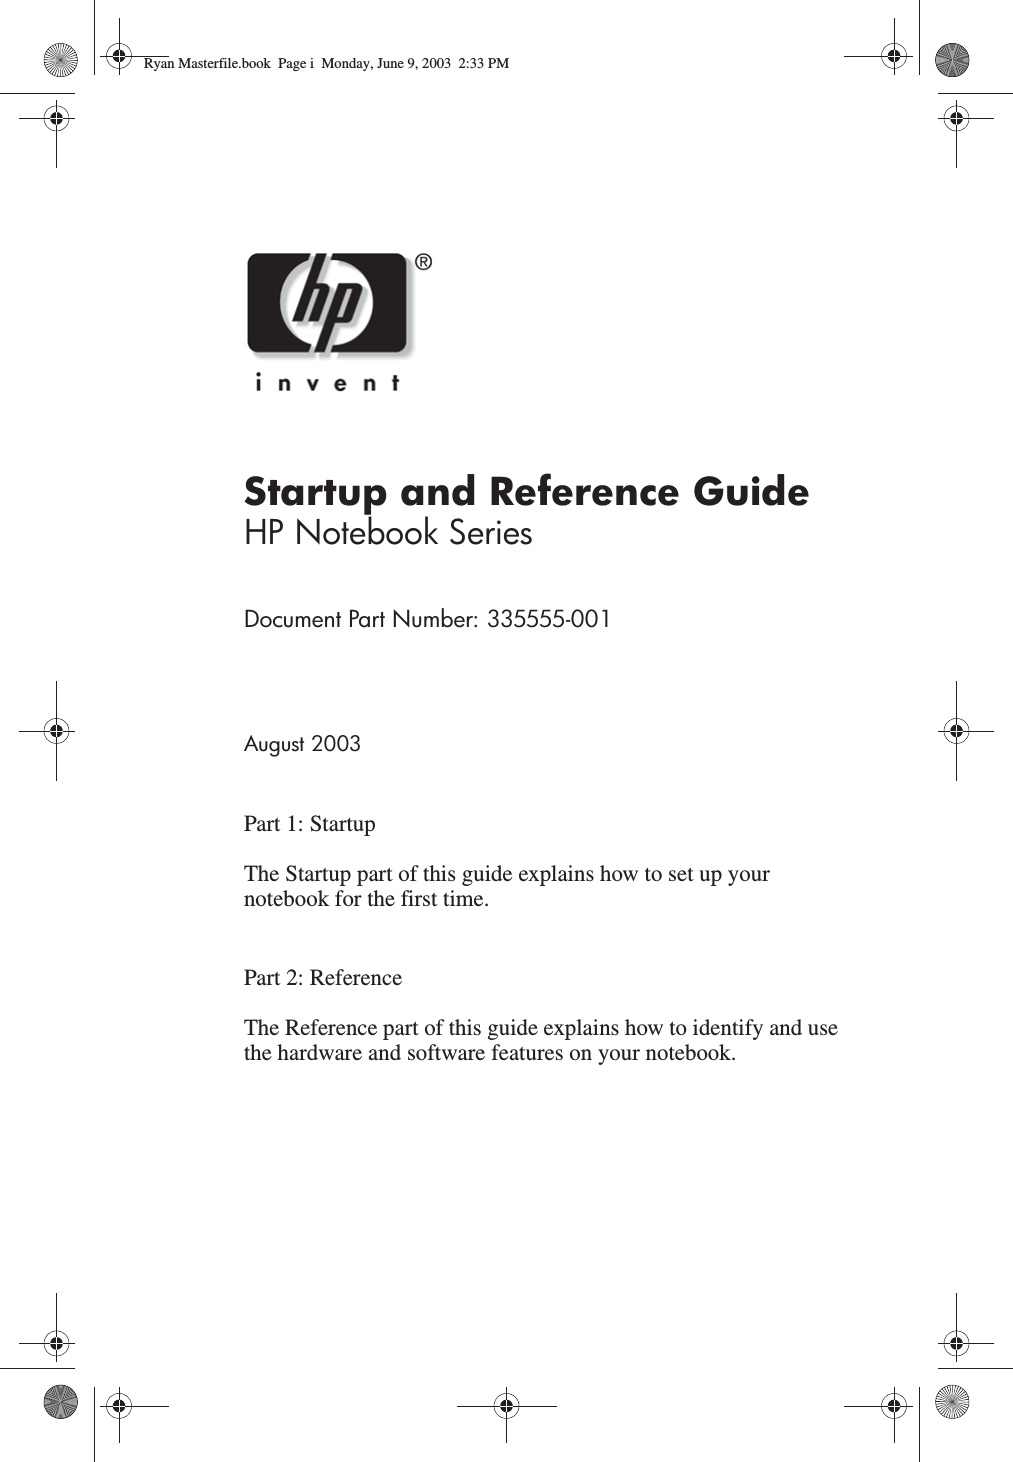 Startup and Reference GuideHP Notebook SeriesDocument Part Number: 335555-001August 2003Part 1: StartupThe Startup part of this guide explains how to set up your notebook for the first time.Part 2: ReferenceThe Reference part of this guide explains how to identify and use the hardware and software features on your notebook.Ryan Masterfile.book  Page i  Monday, June 9, 2003  2:33 PM